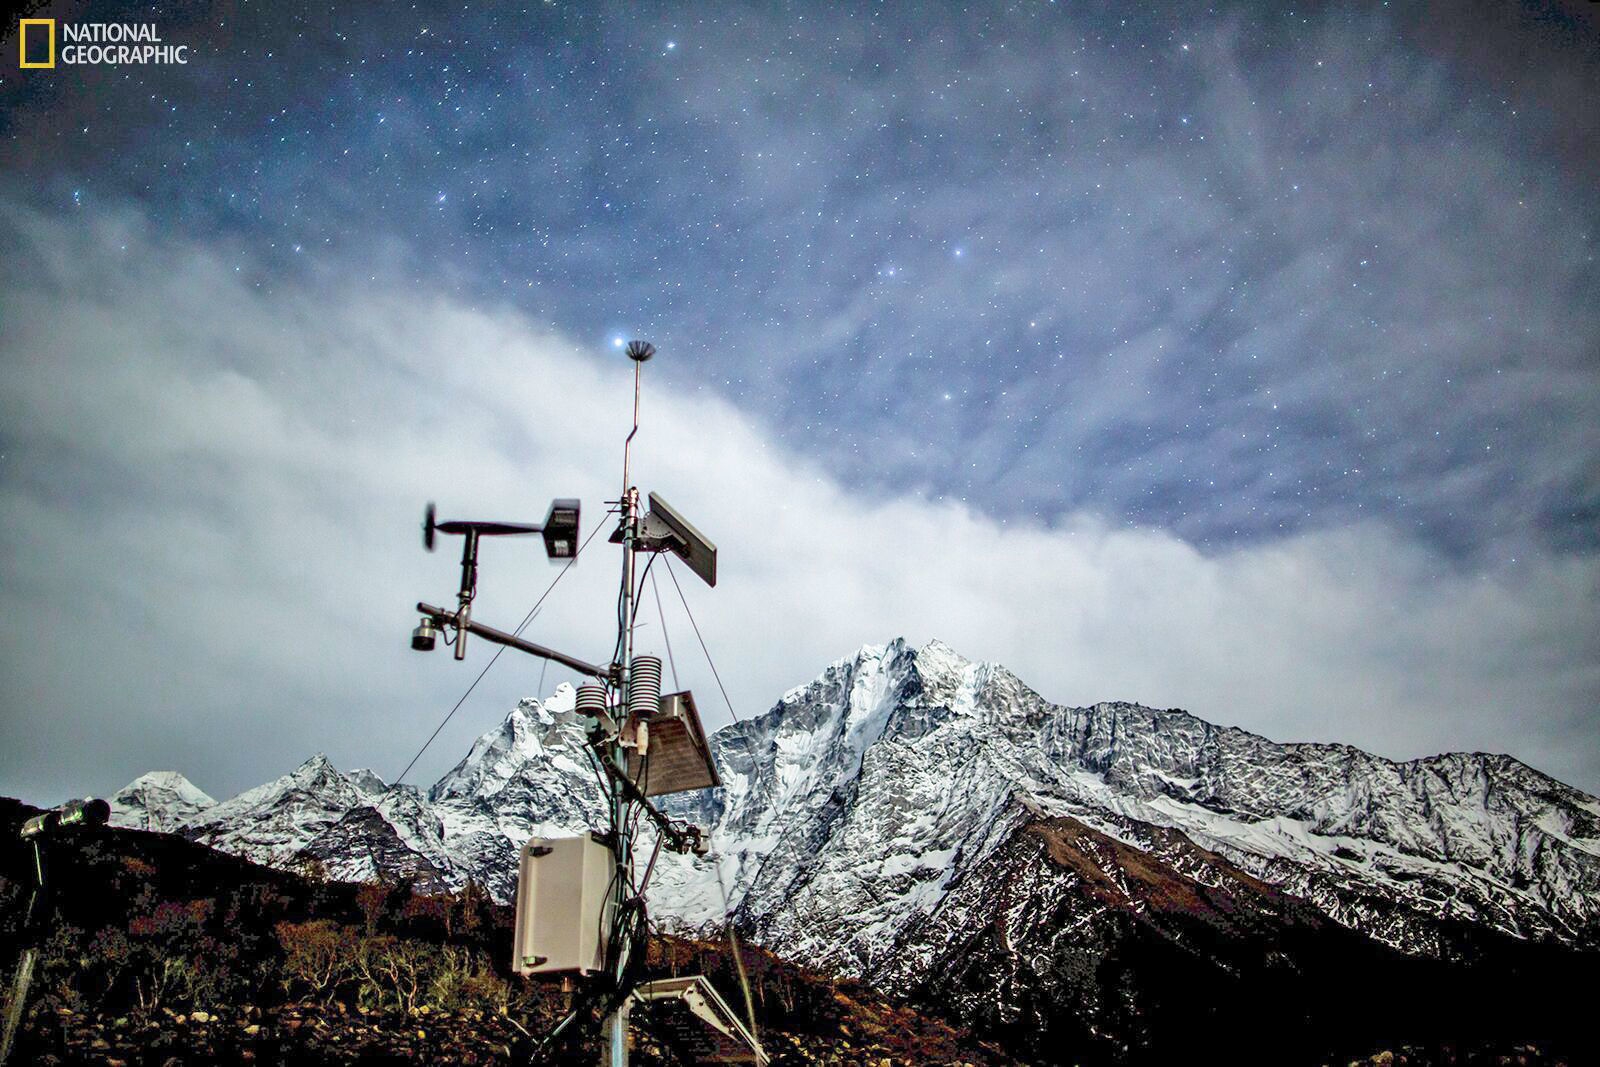 Mount Everest expedition installs highest weather stations on Earth | DeviceDaily.com